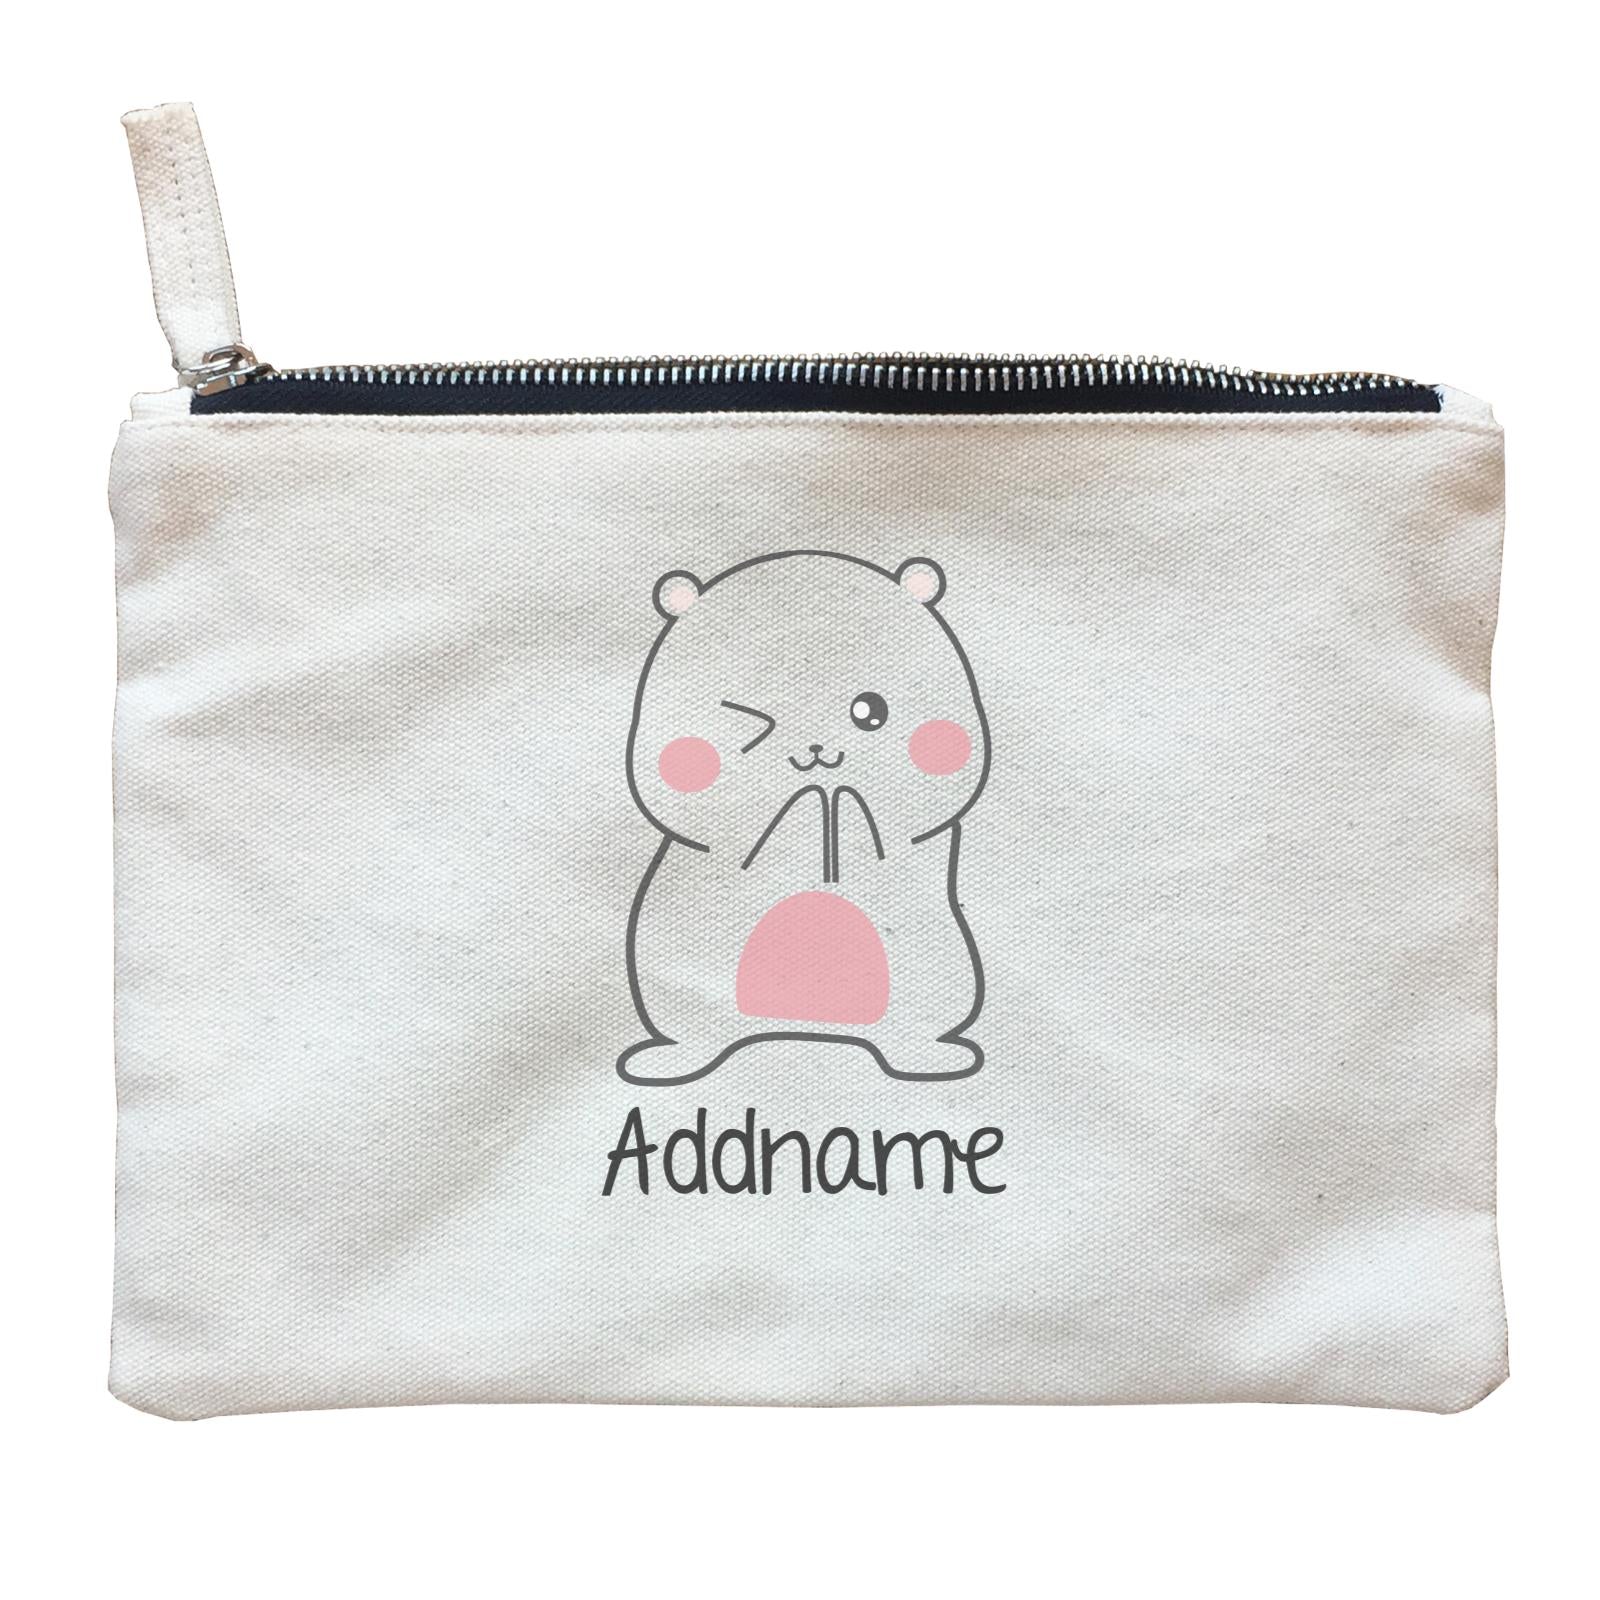 Cute Hamster Daddy Addname Zipper Pouch